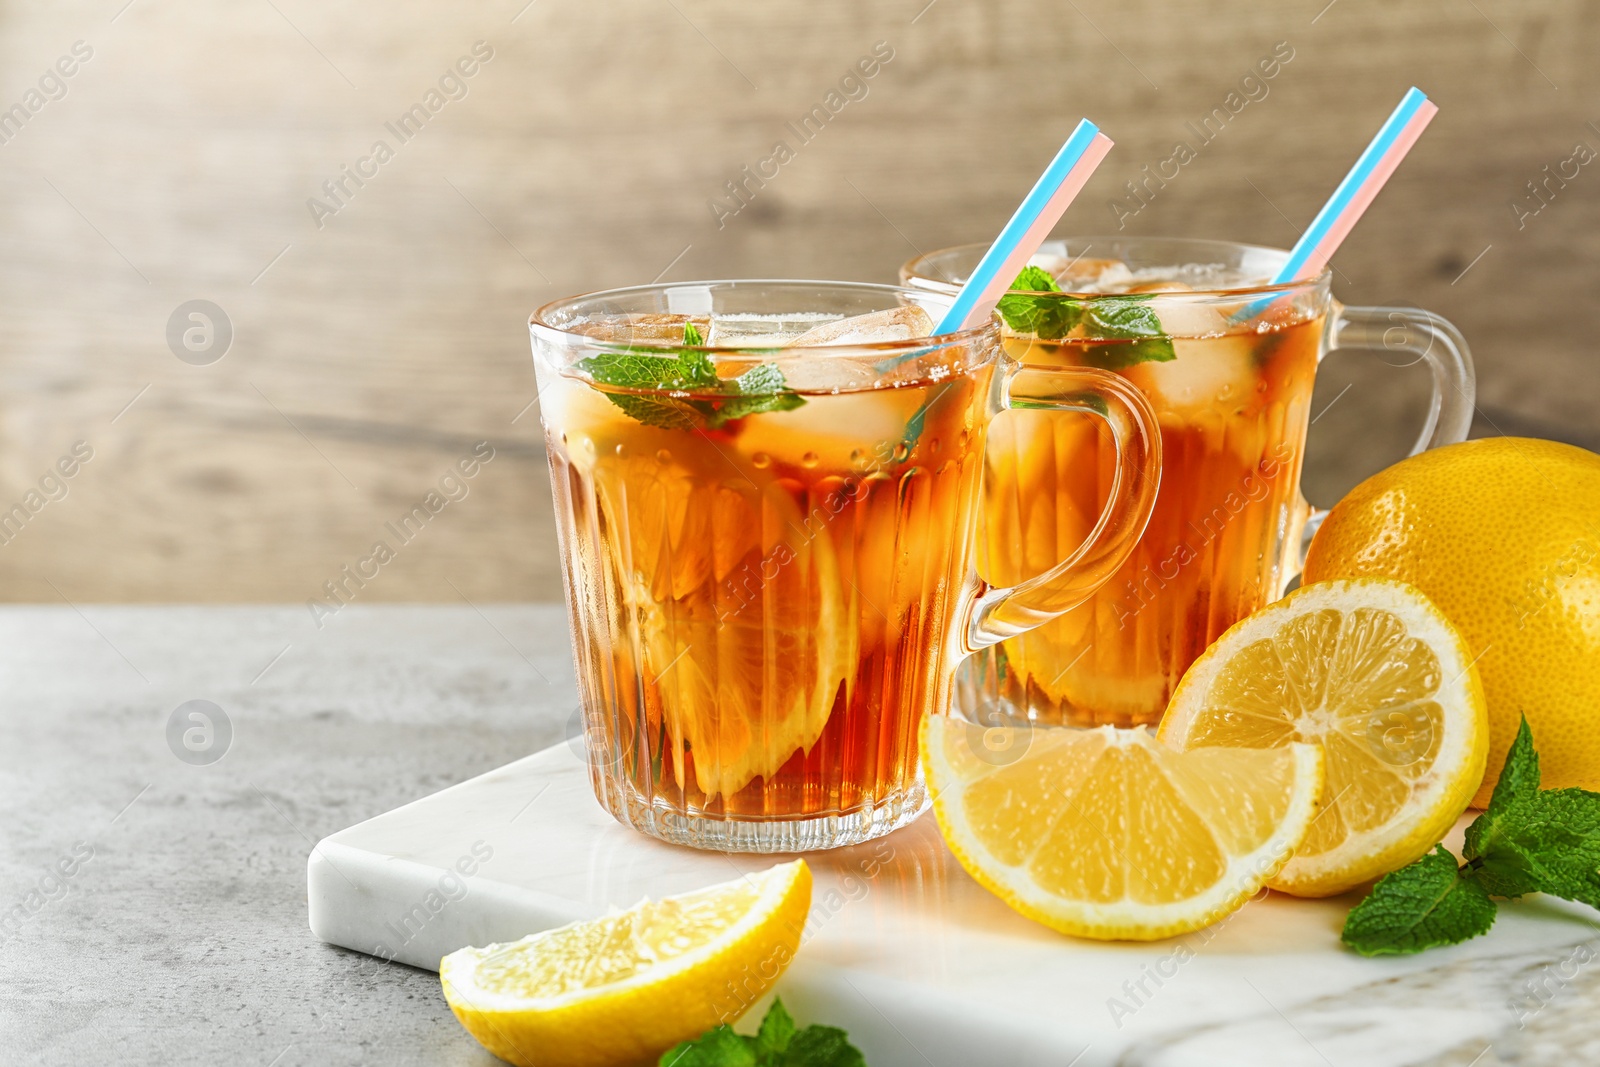 Photo of Cups of refreshing iced tea on table against wooden background